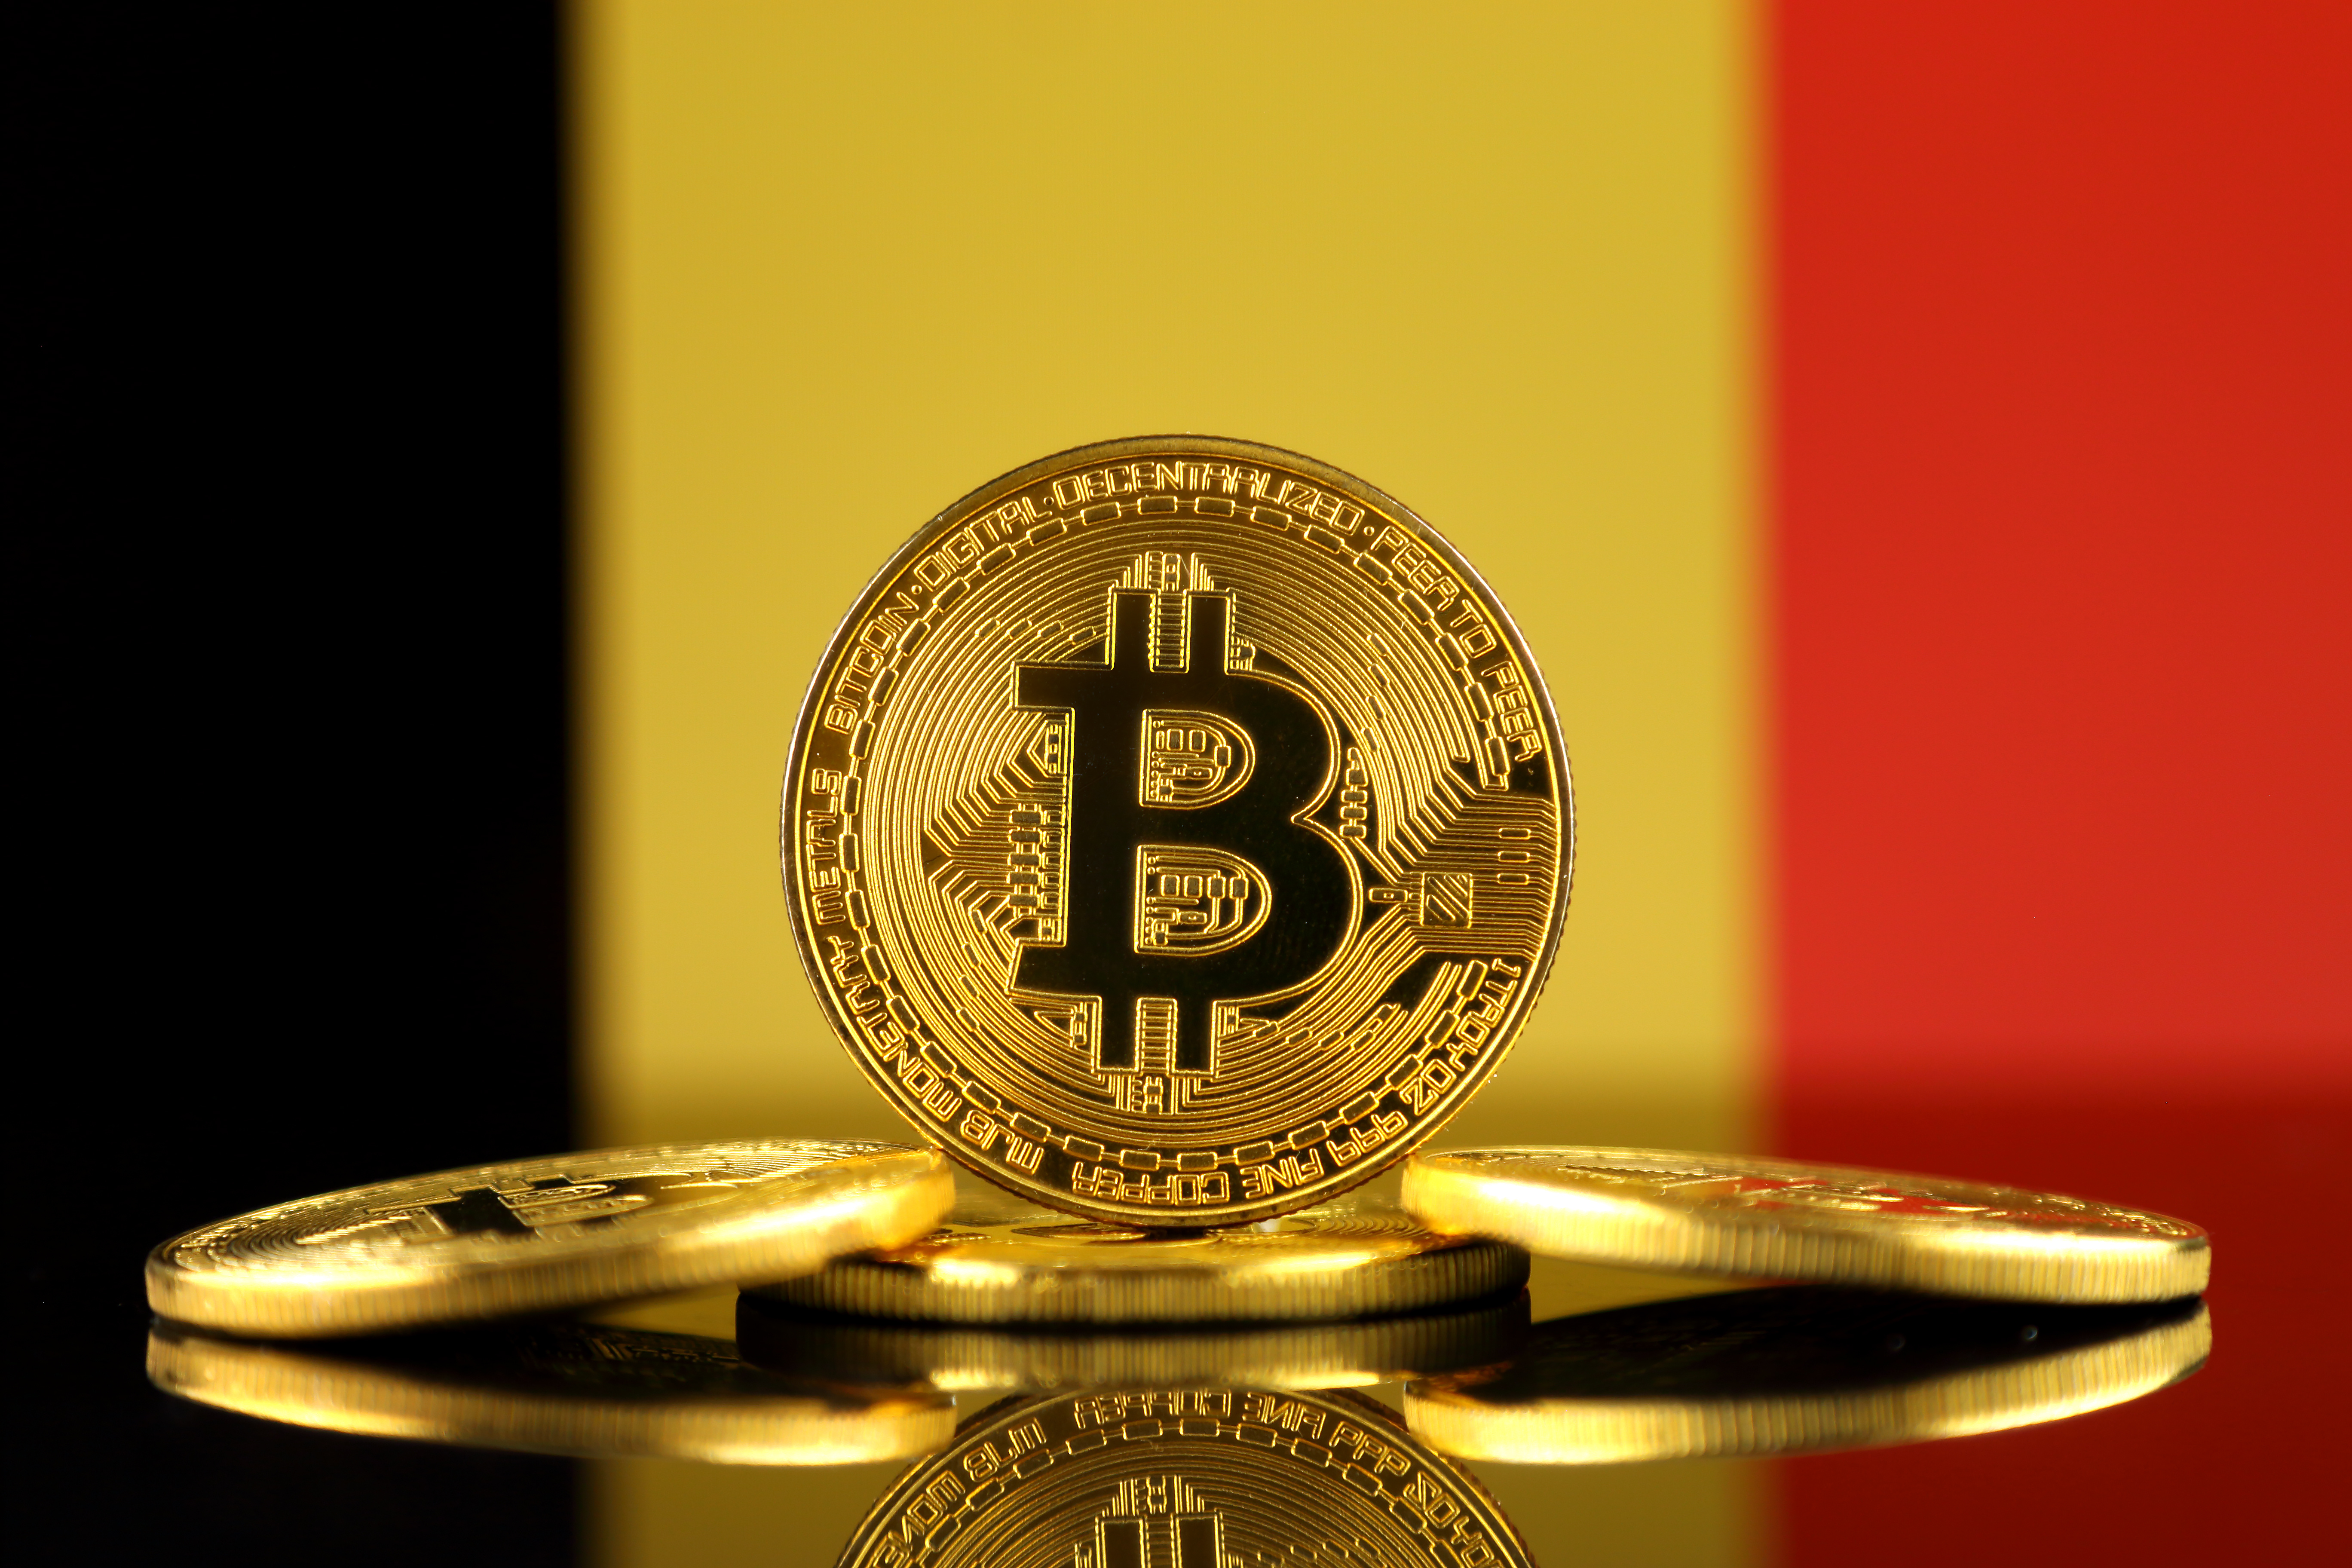 A representation of a stack of Bitcoin tokens against the backdrop of the Belgian flag.